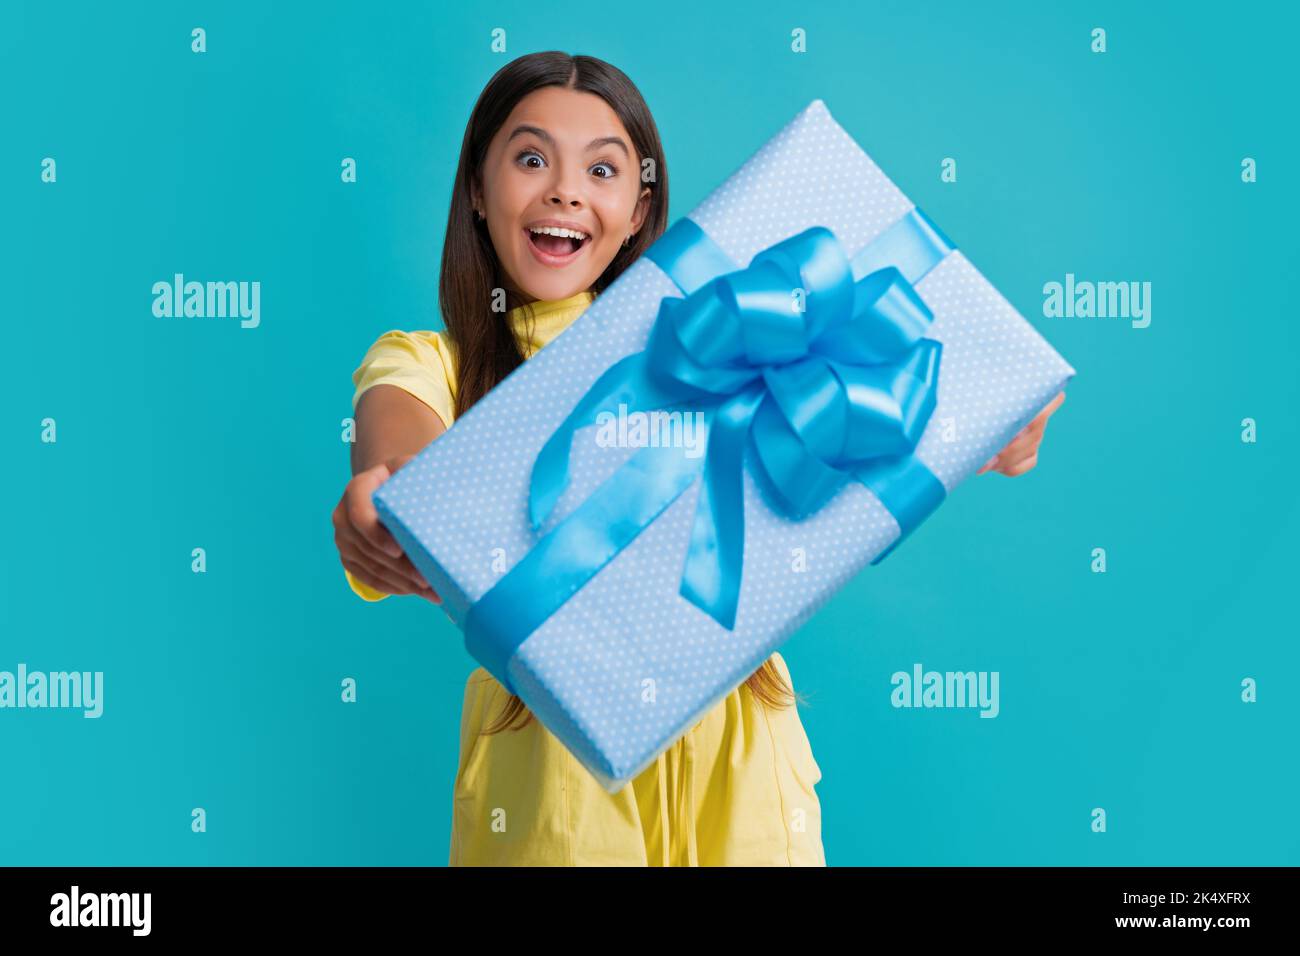 Teenage kid with present box. Teen girl giving birthday gift. Present, greeting and gifting concept. Excited face, cheerful emotions of teenager child Stock Photo